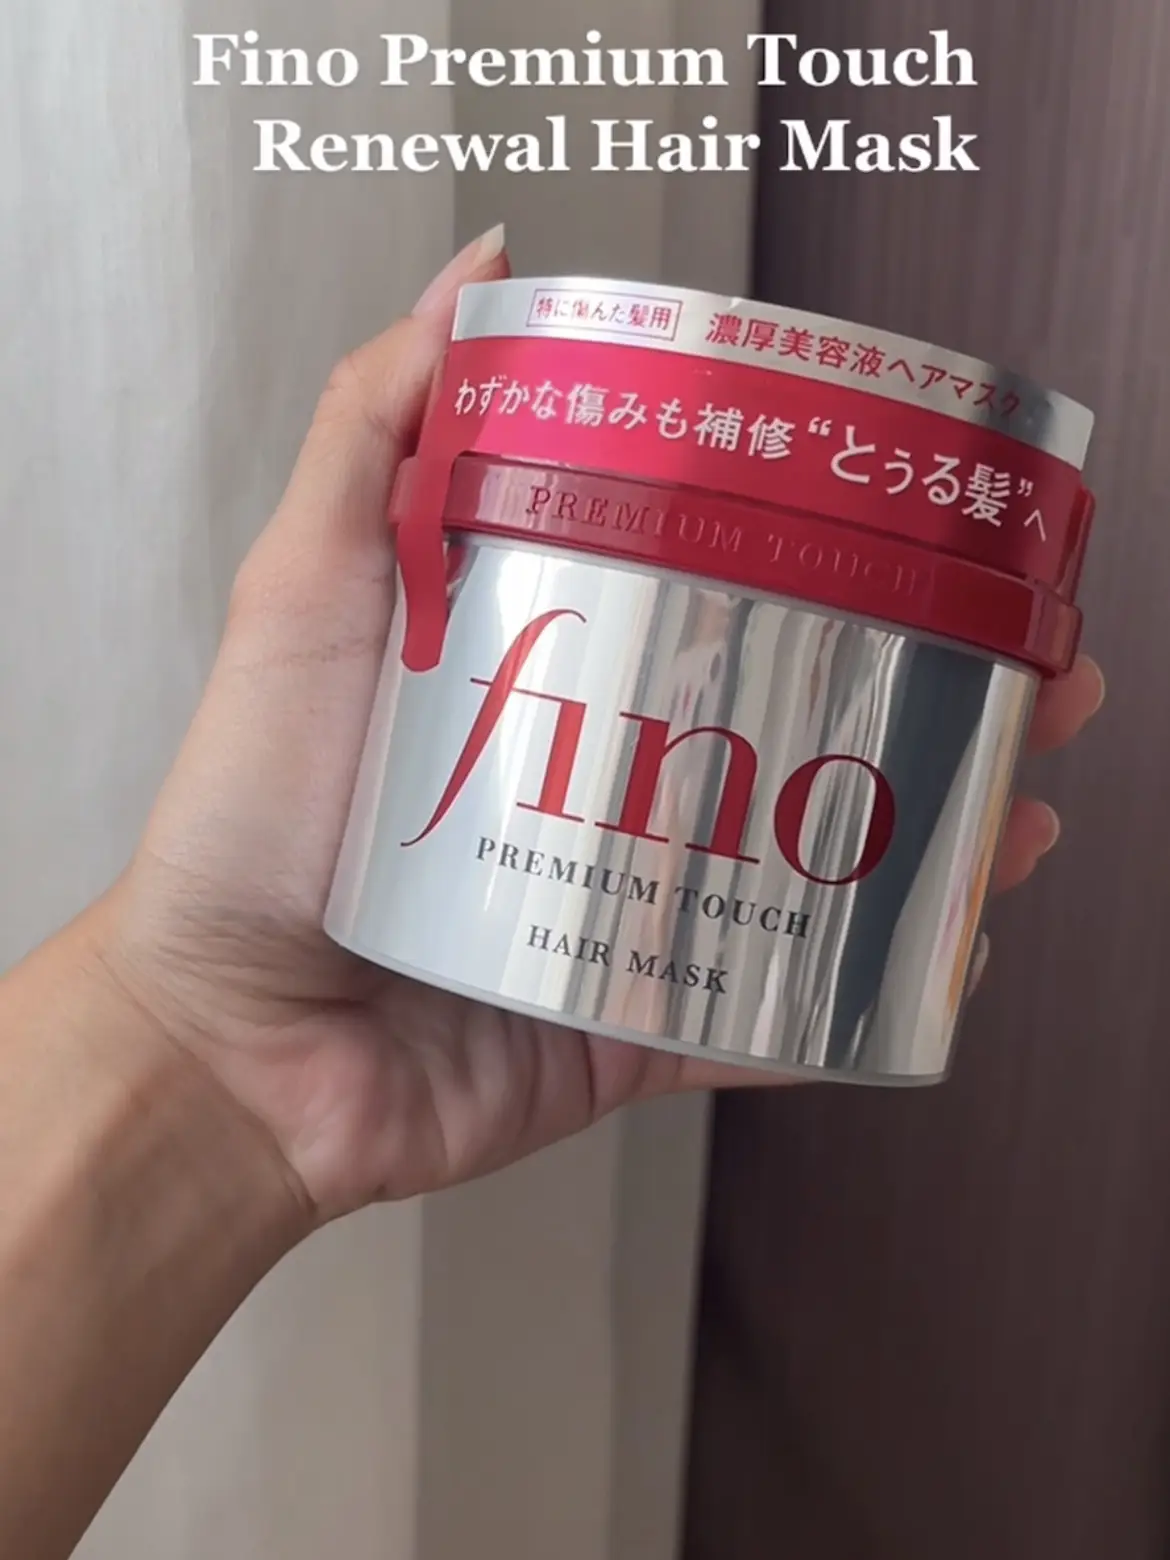 TRYING THE VIRAL FINO HAIR MASK 😳 